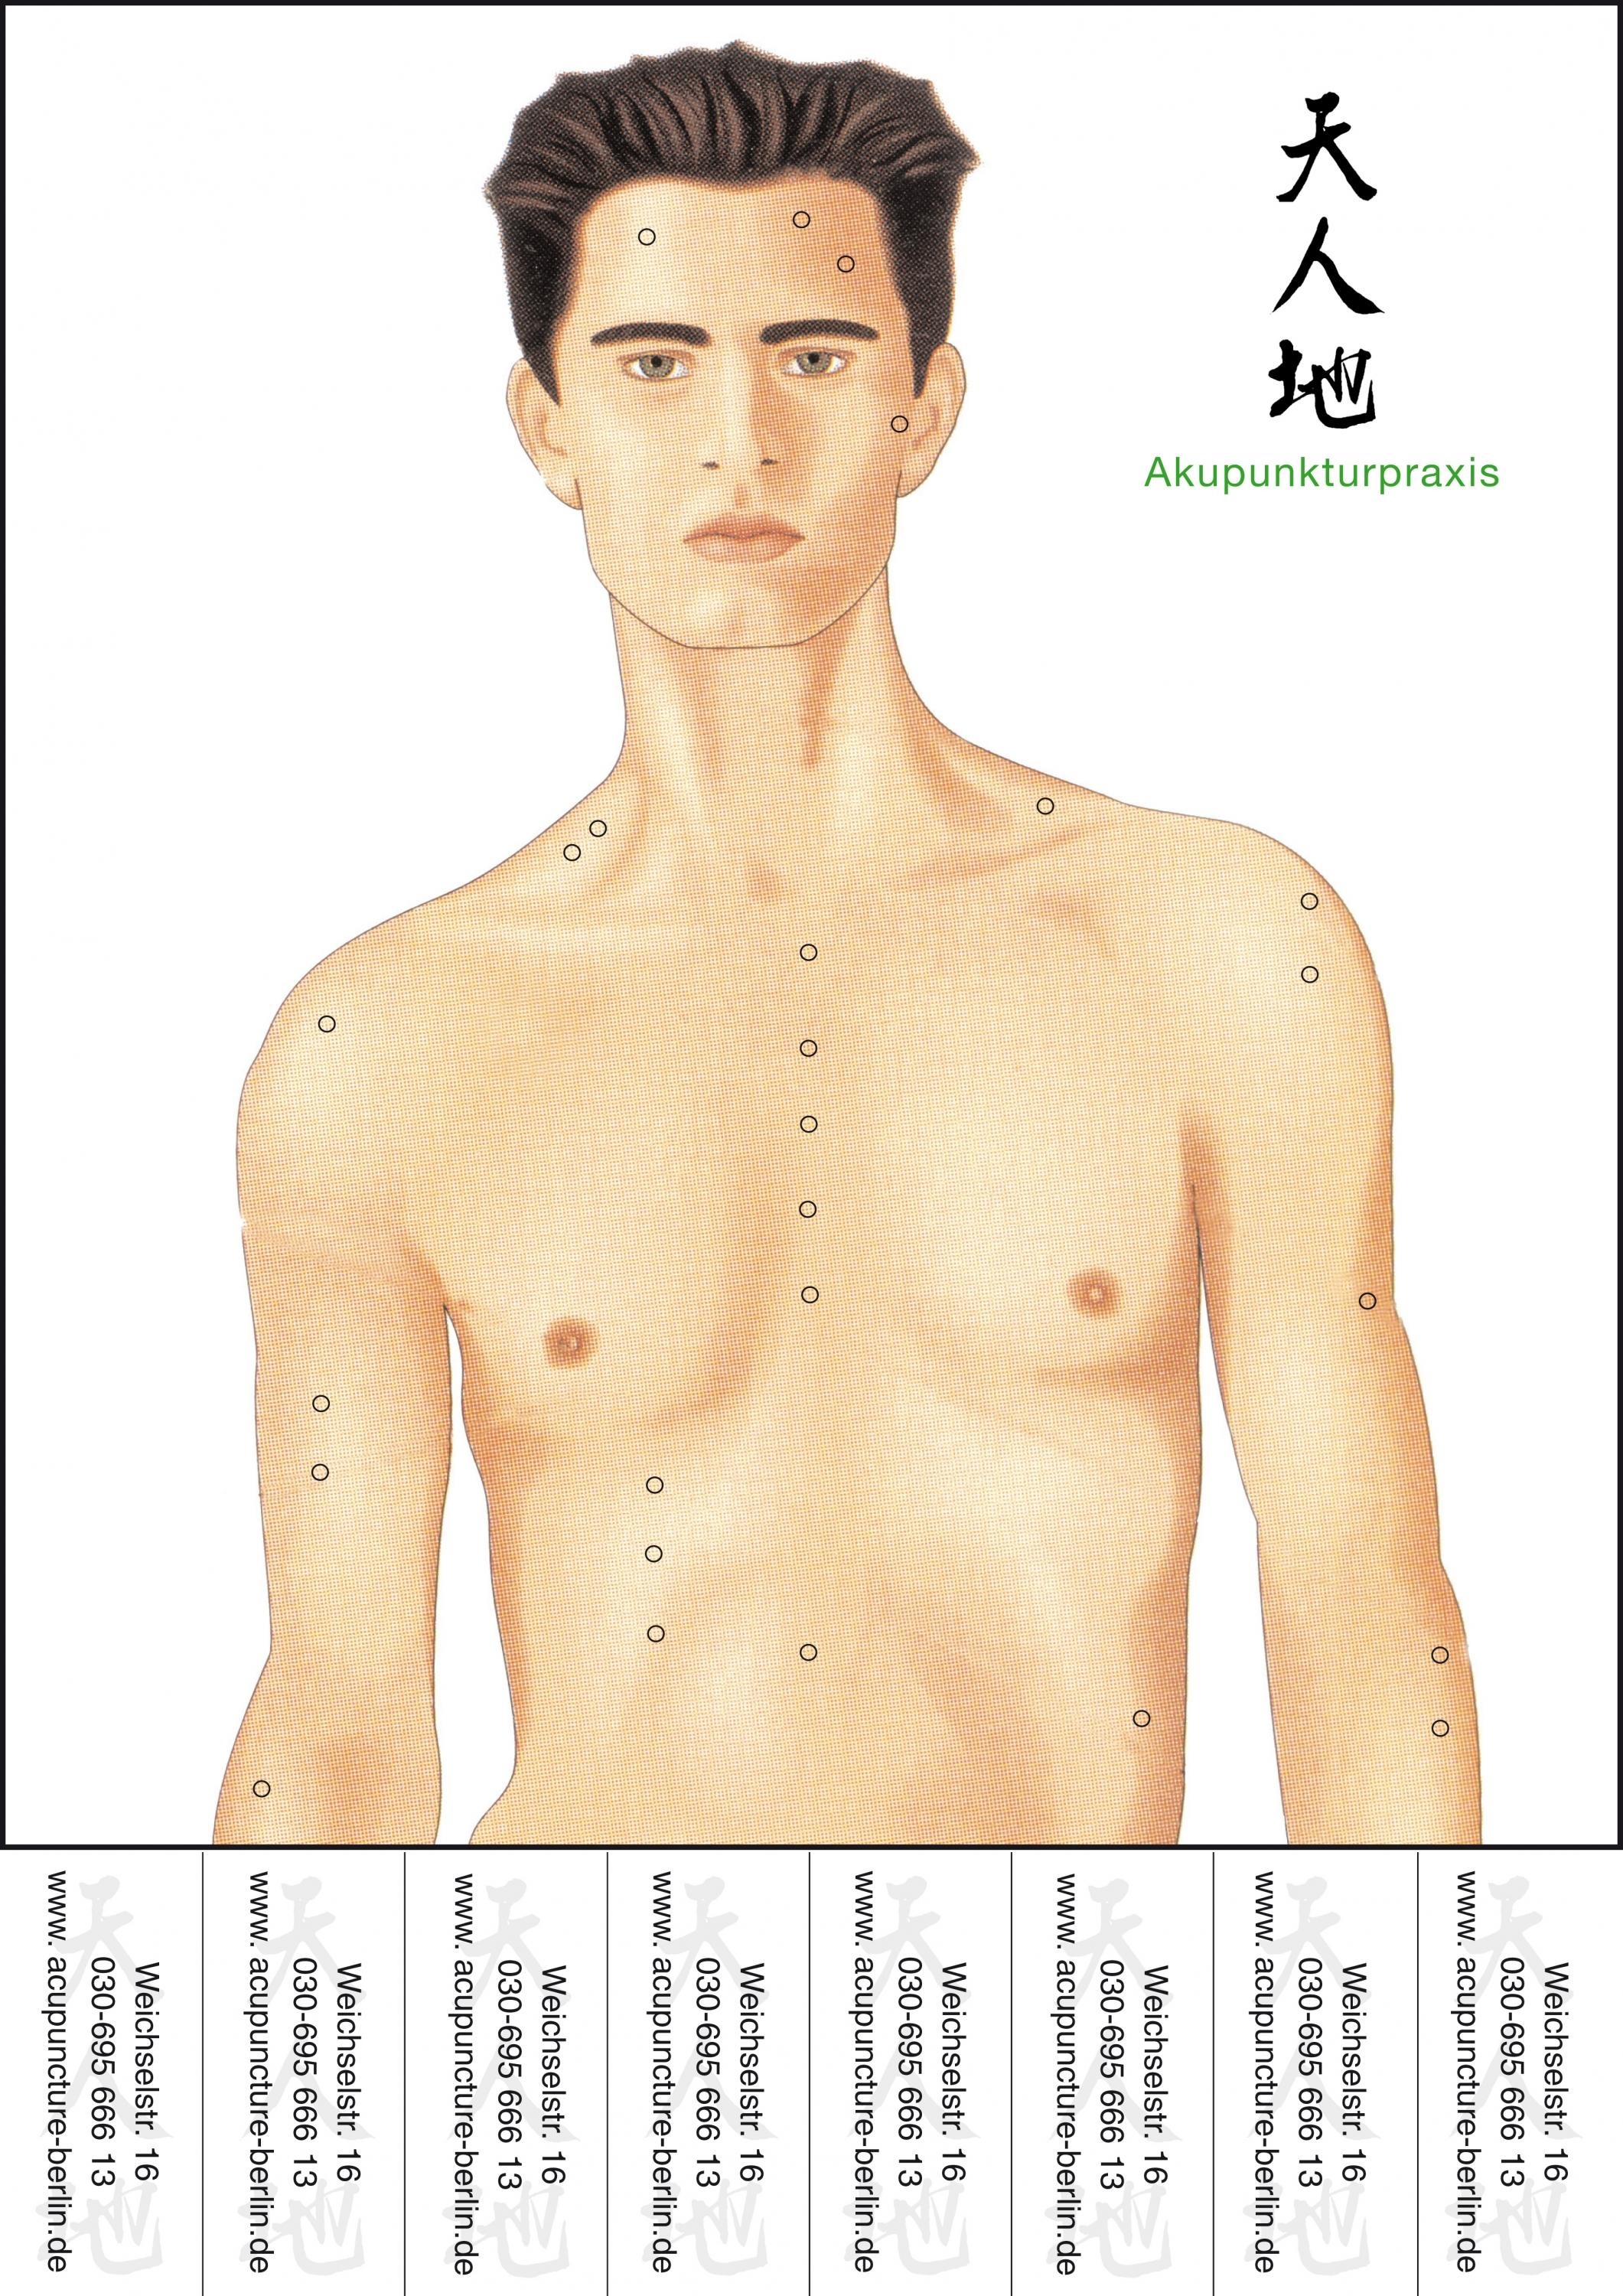 ACUPUNCTURE CLINIC